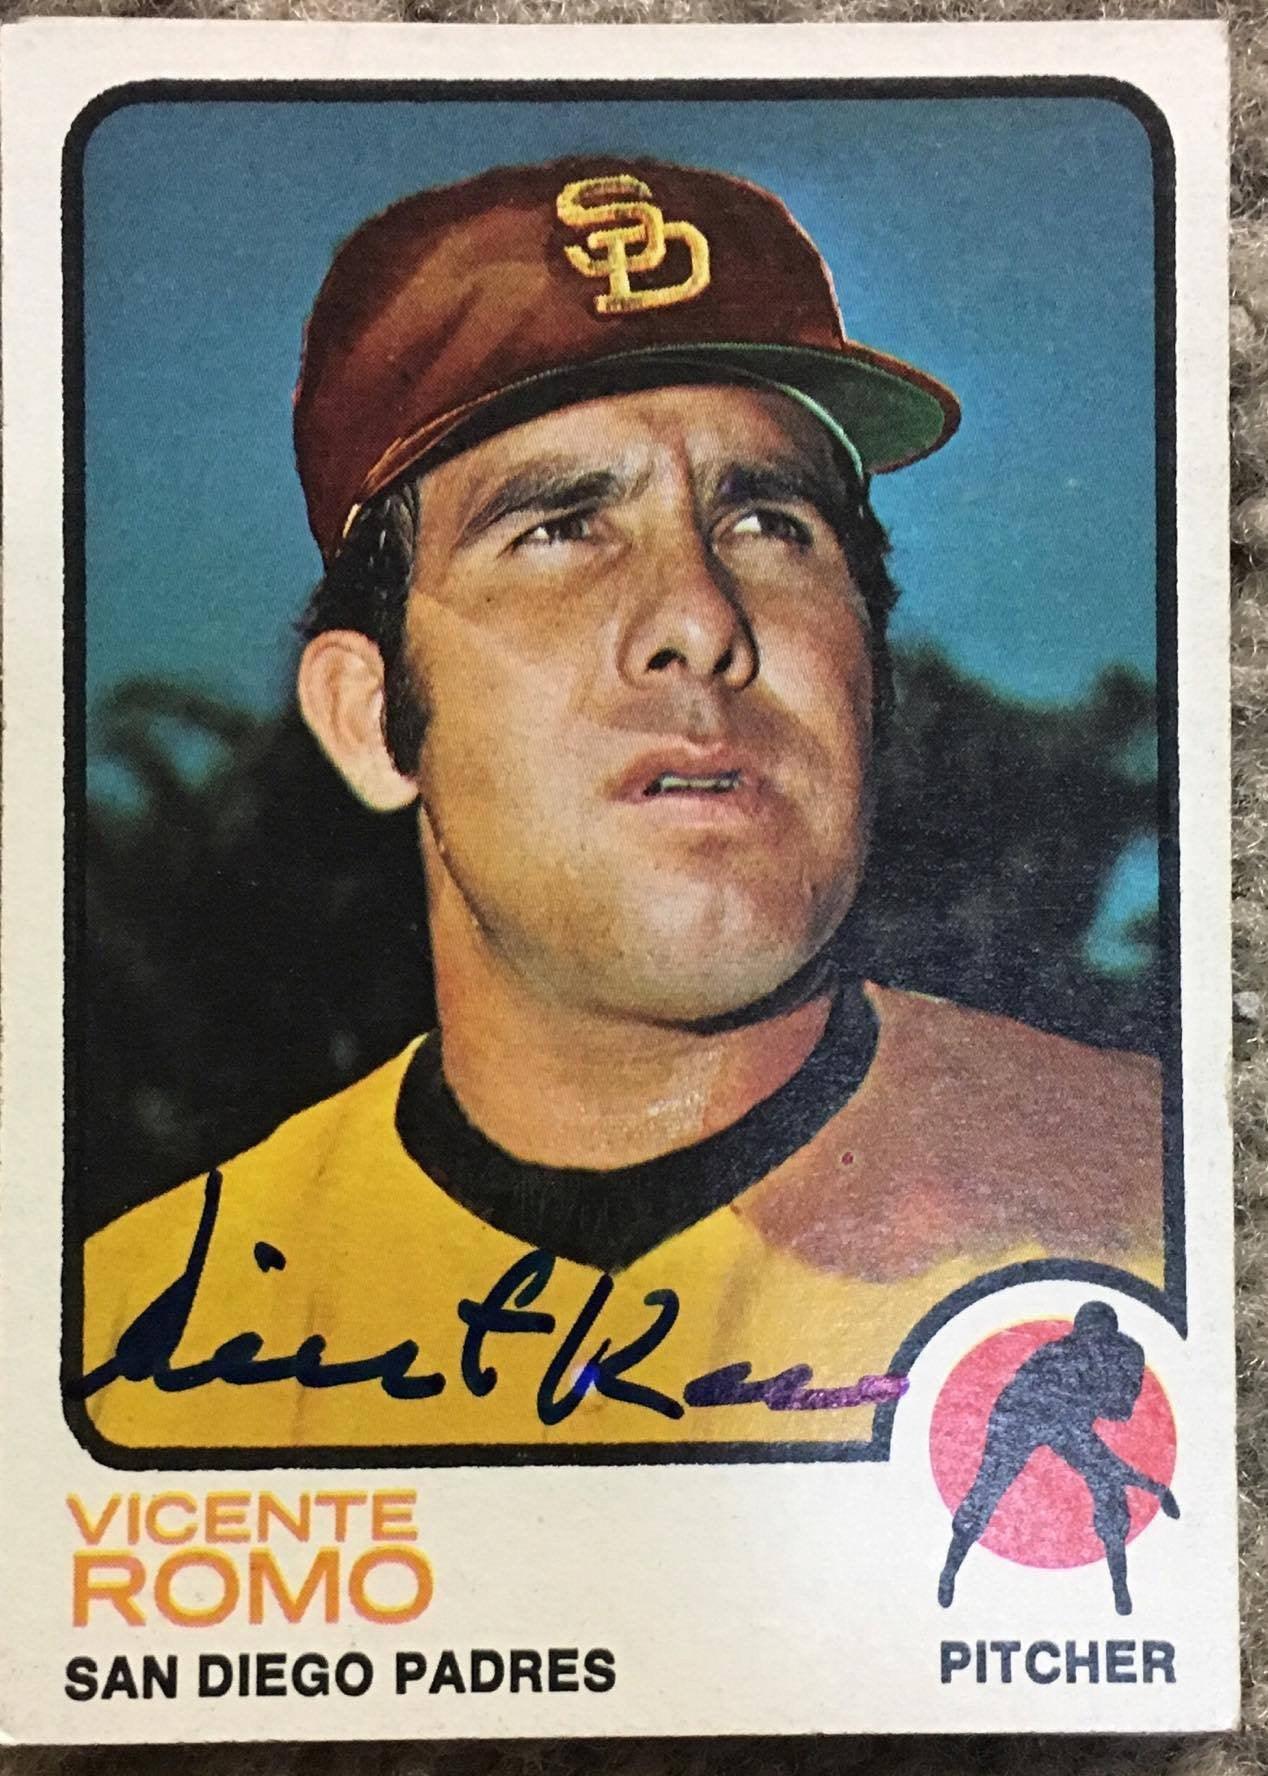 Vicente Romo Signed 1973 Topps Baseball Card - San Diego Padres - PastPros